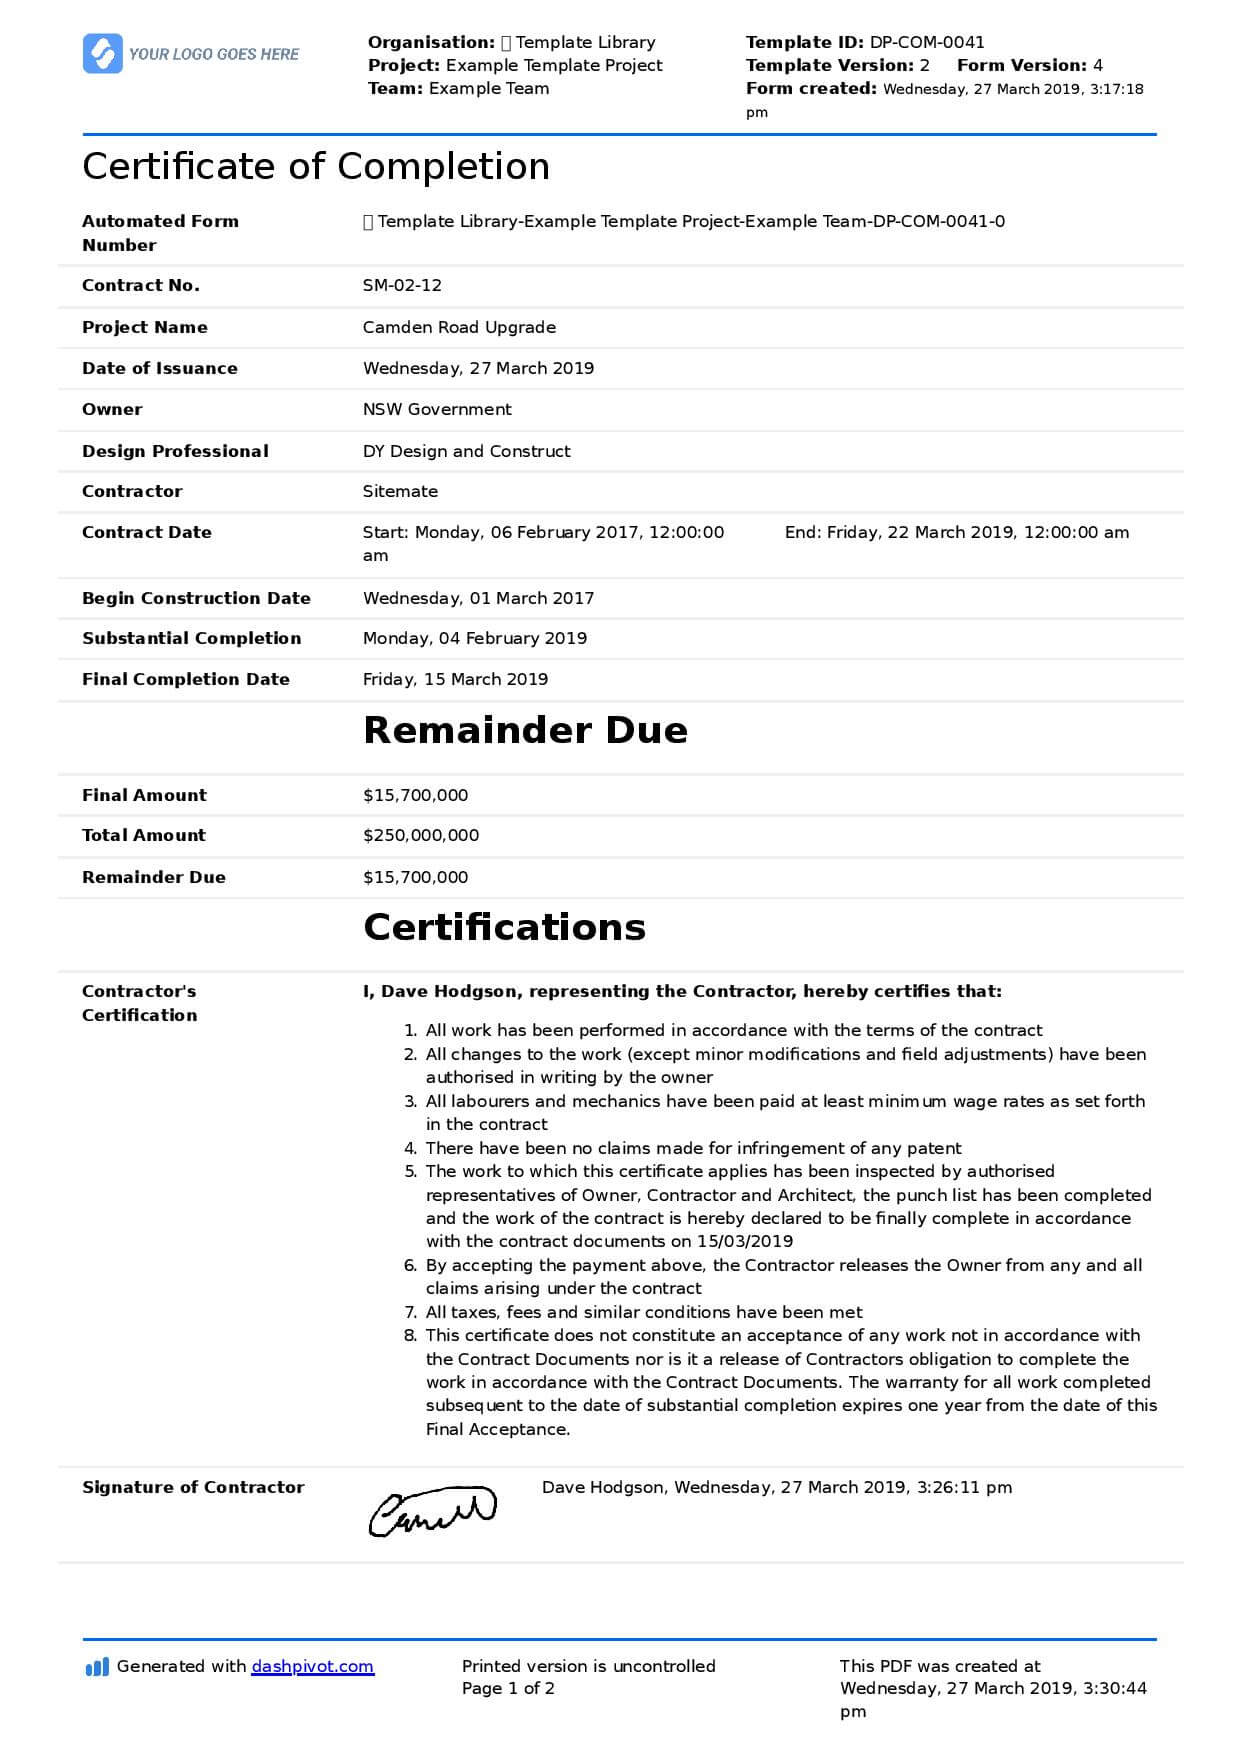 Certificate Of Completion For Construction (Free Template + Within Certificate Of Completion Construction Templates